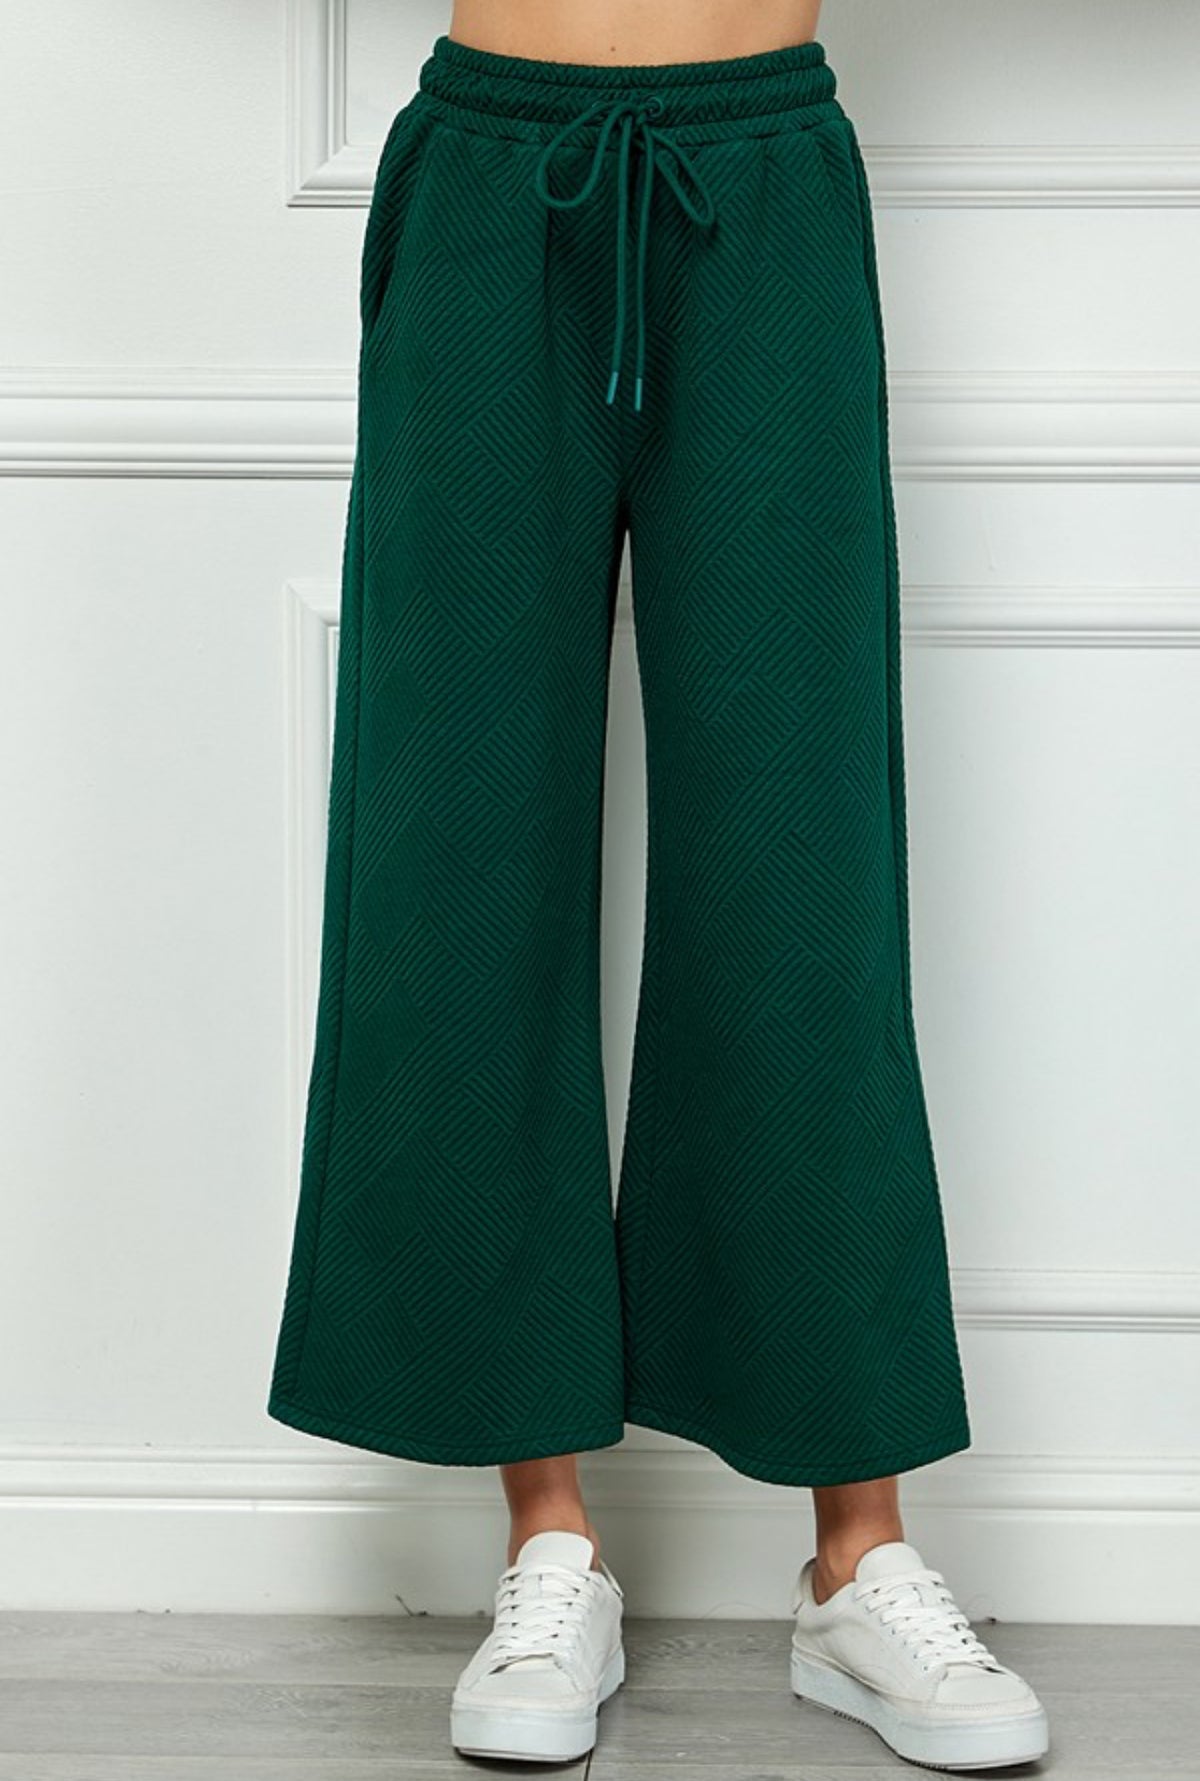 GREEN TEXTURE CROPPED FLARE PANT